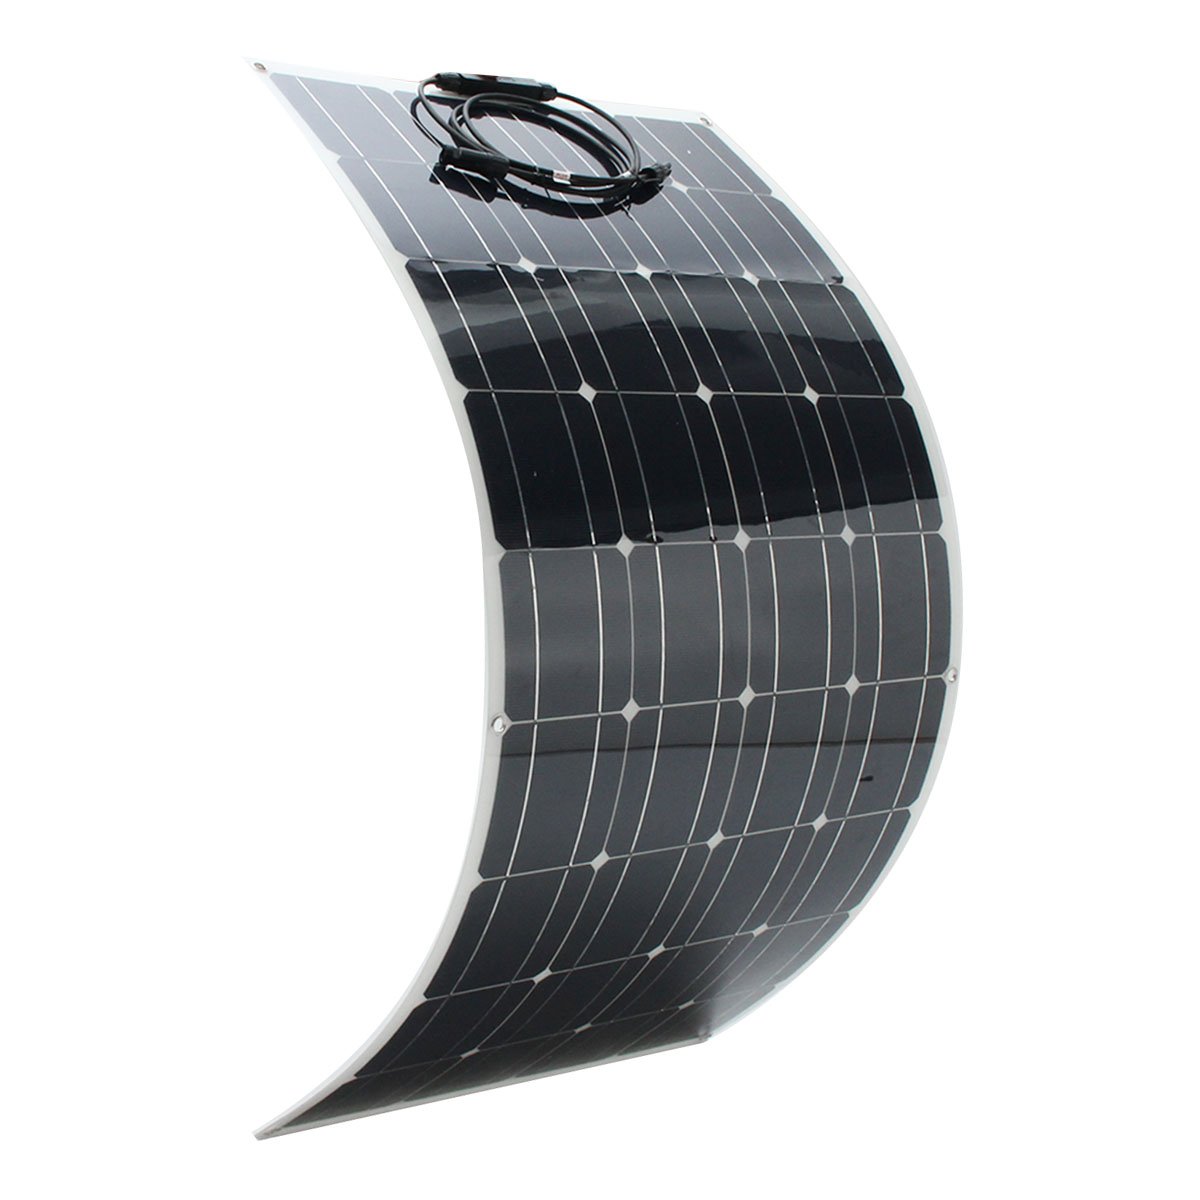 Elfeland® SP-39 120W 1180*540mm Semi-Flexible Solar Panel With 1.5m Cable Front Junction Box 2